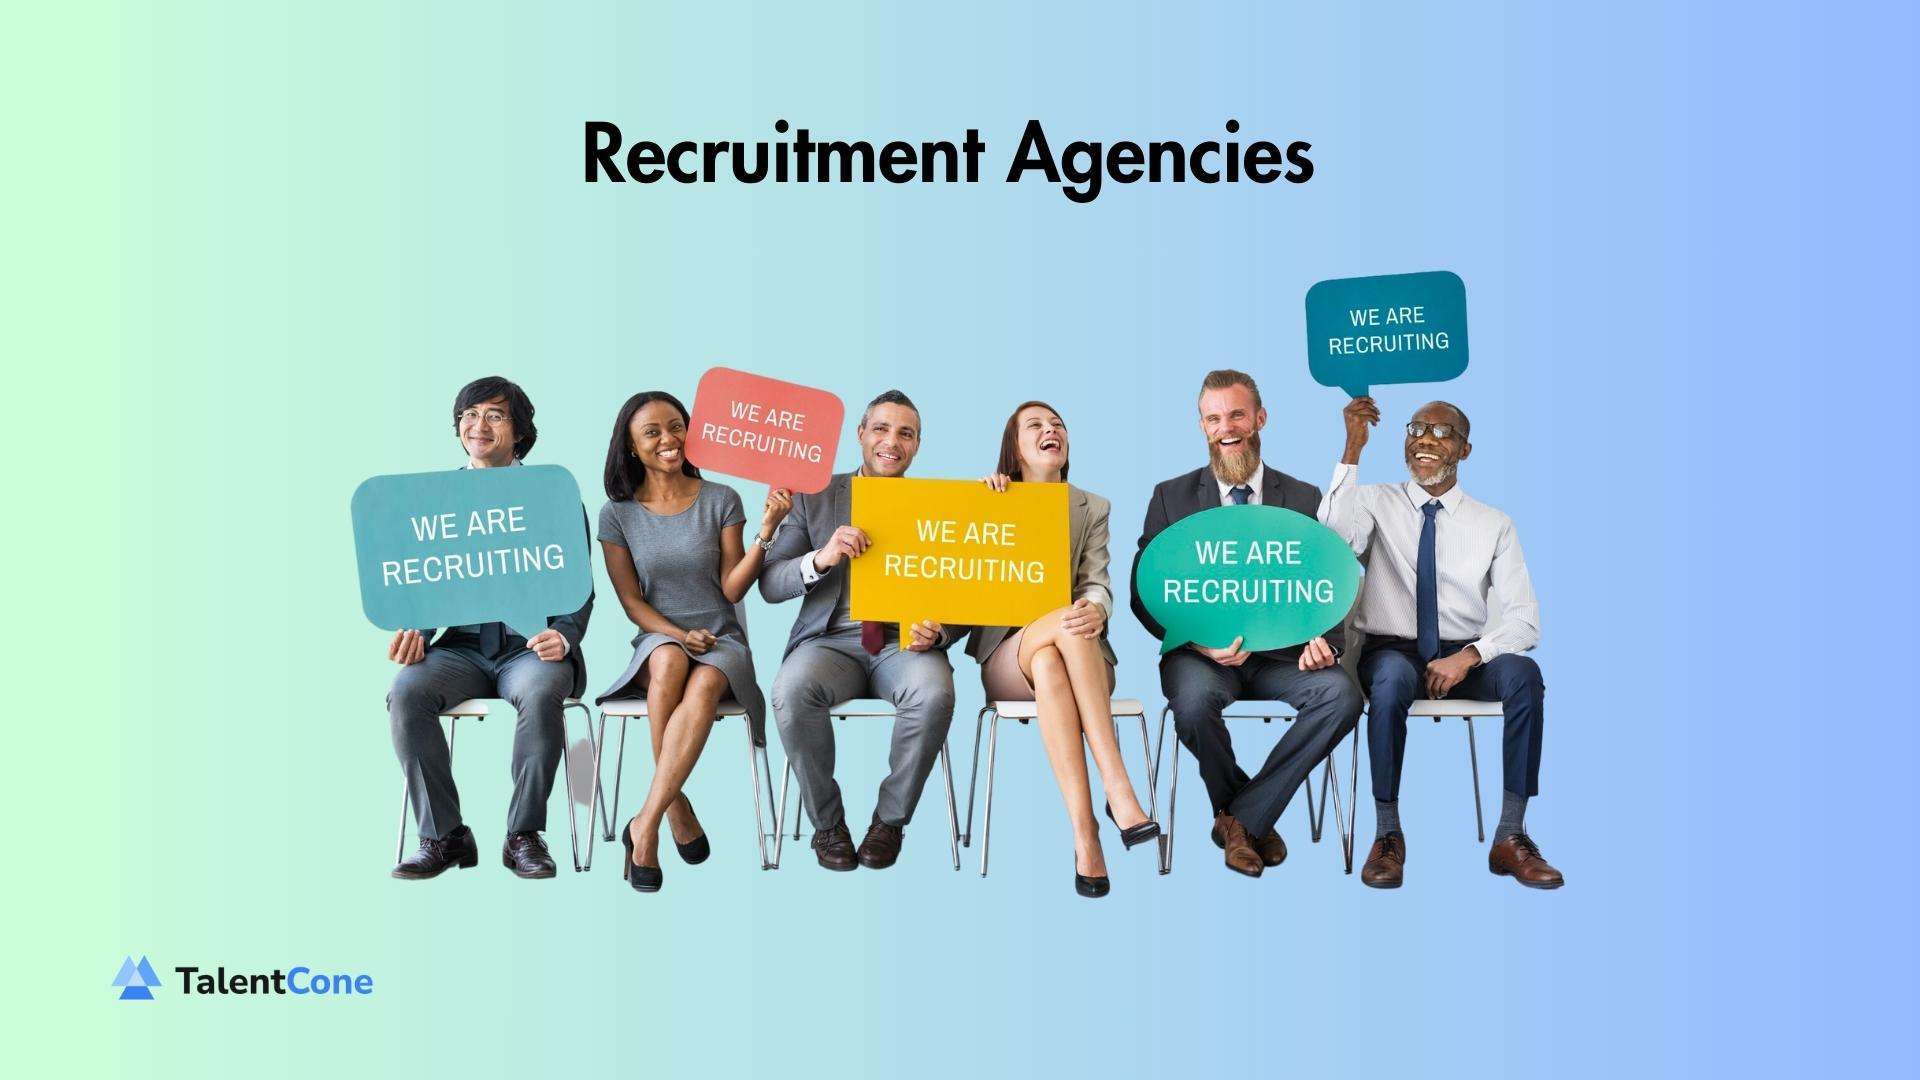 Why Use Recruitment Agencies